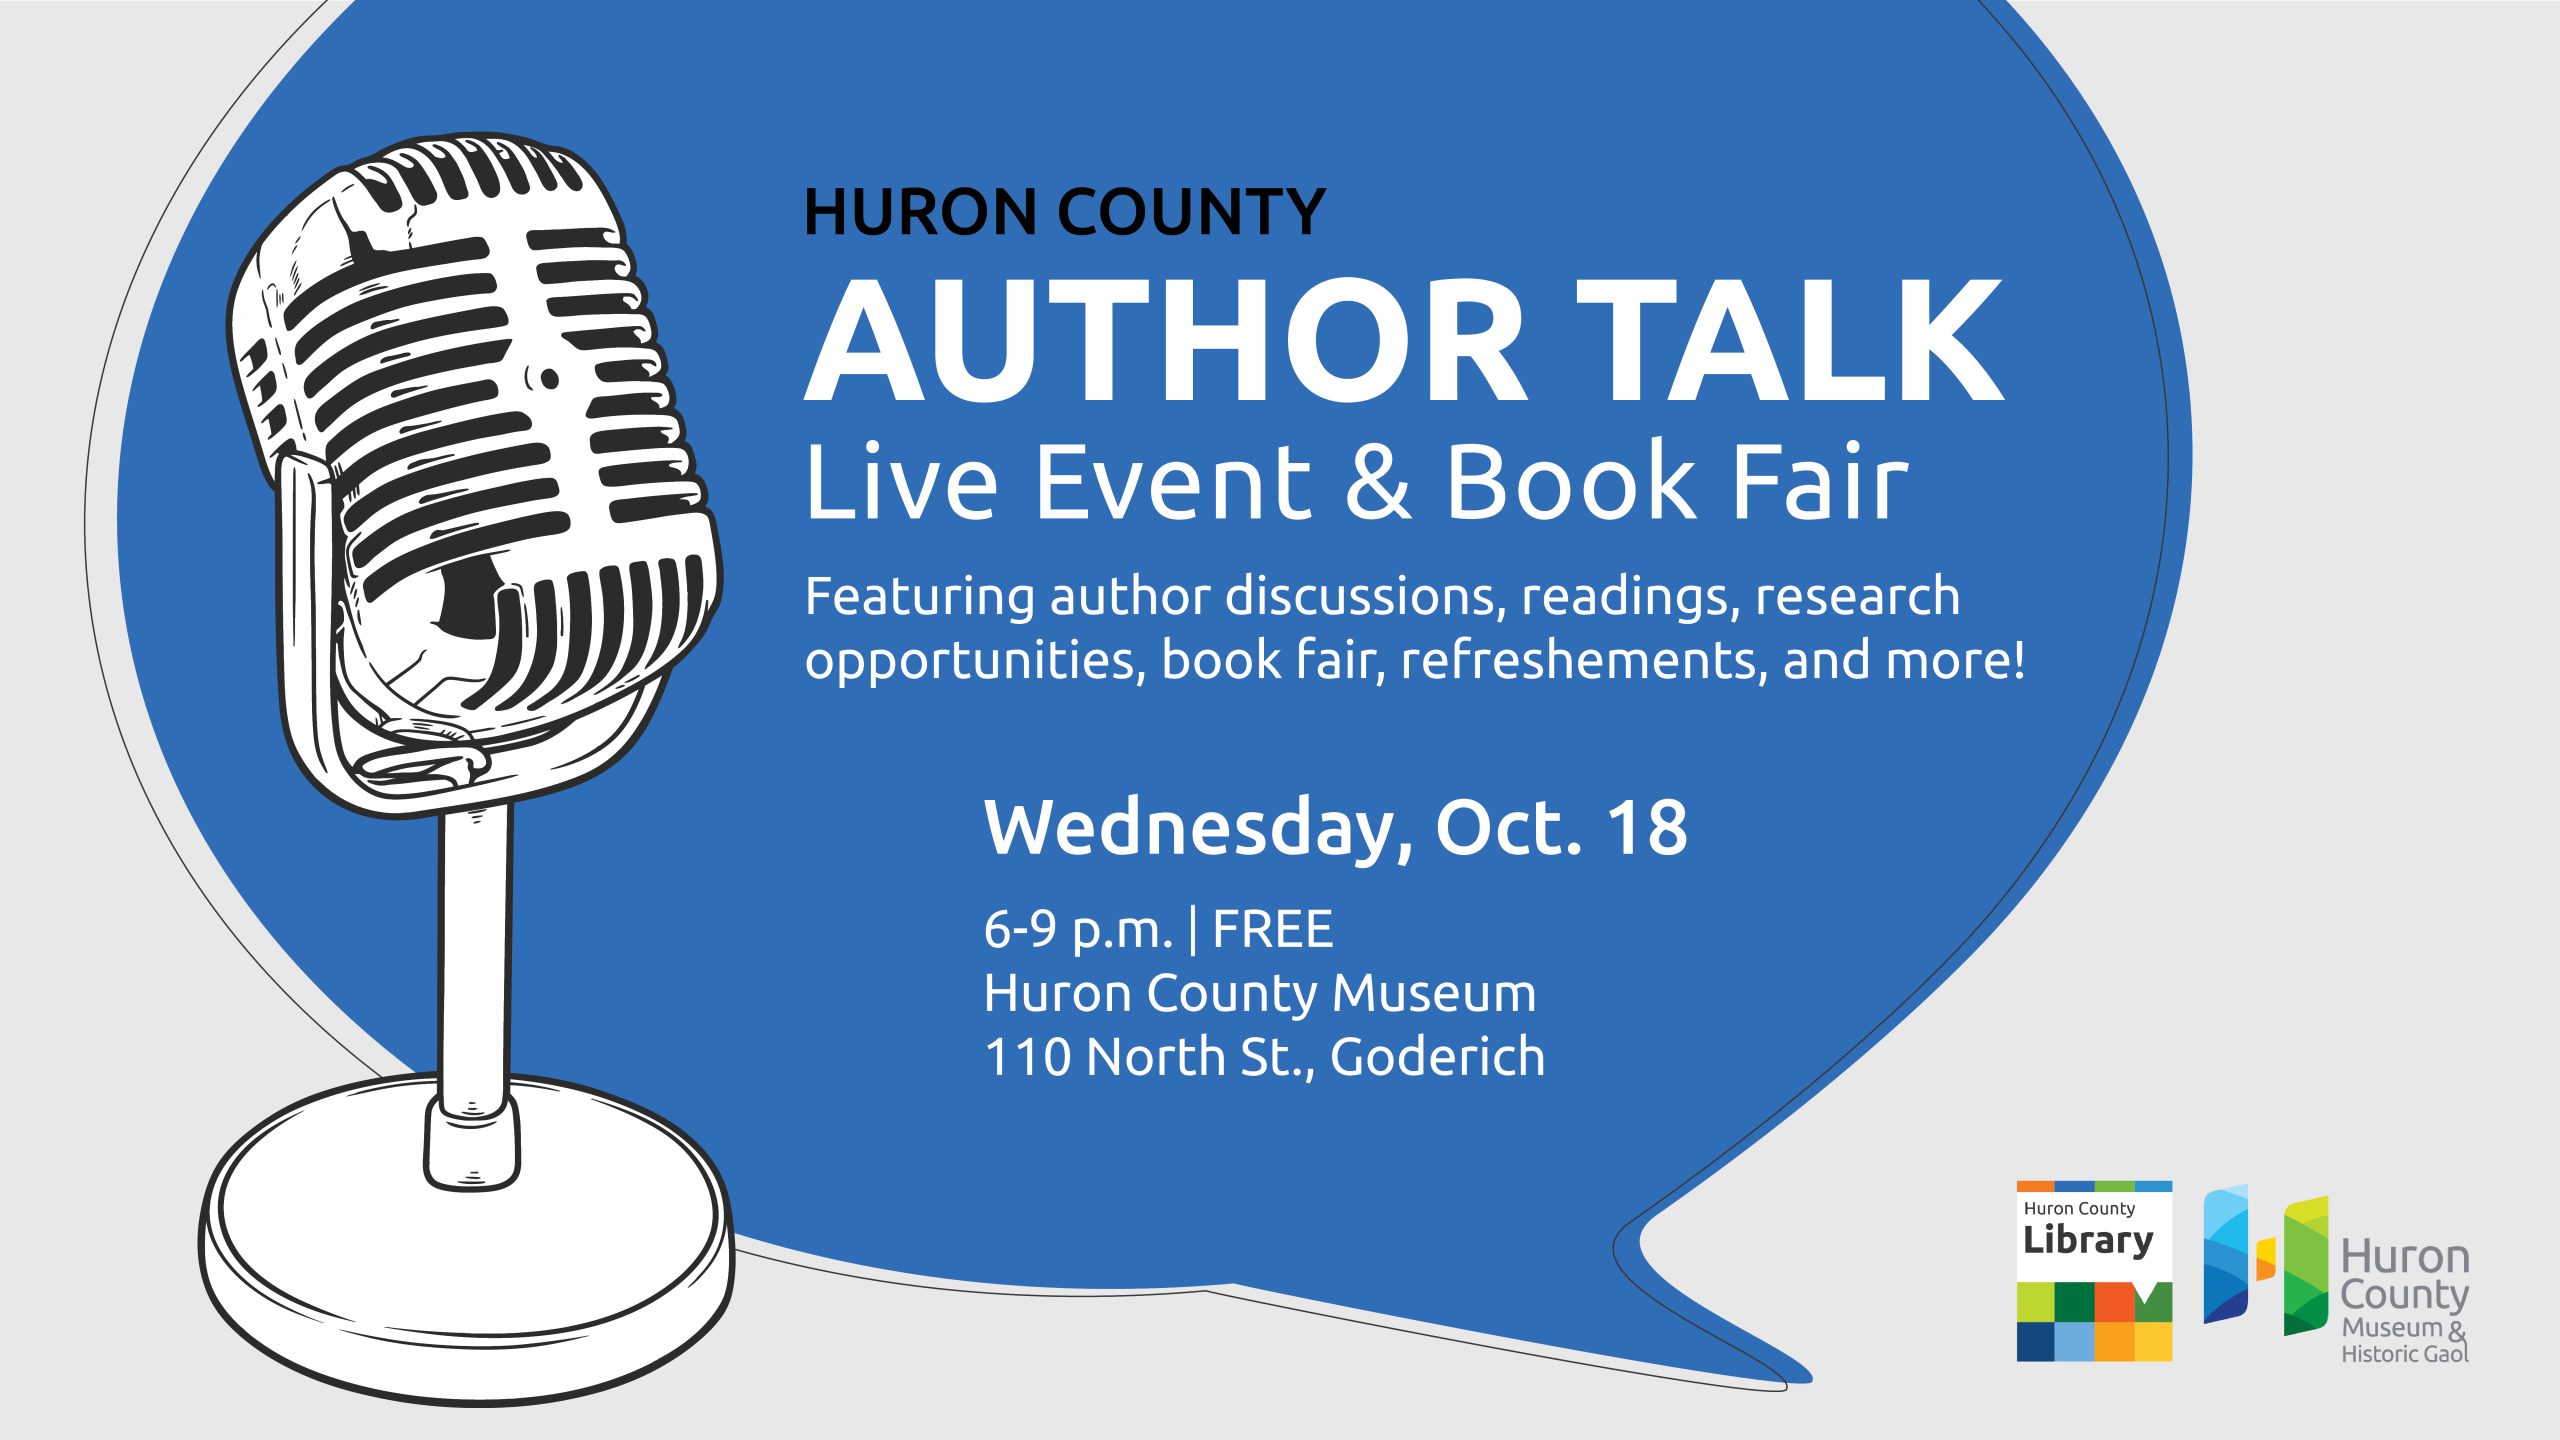 Large blue speech bubble with an illustration of a microphone and text promoting Author Talk live event at the Huron County Museum